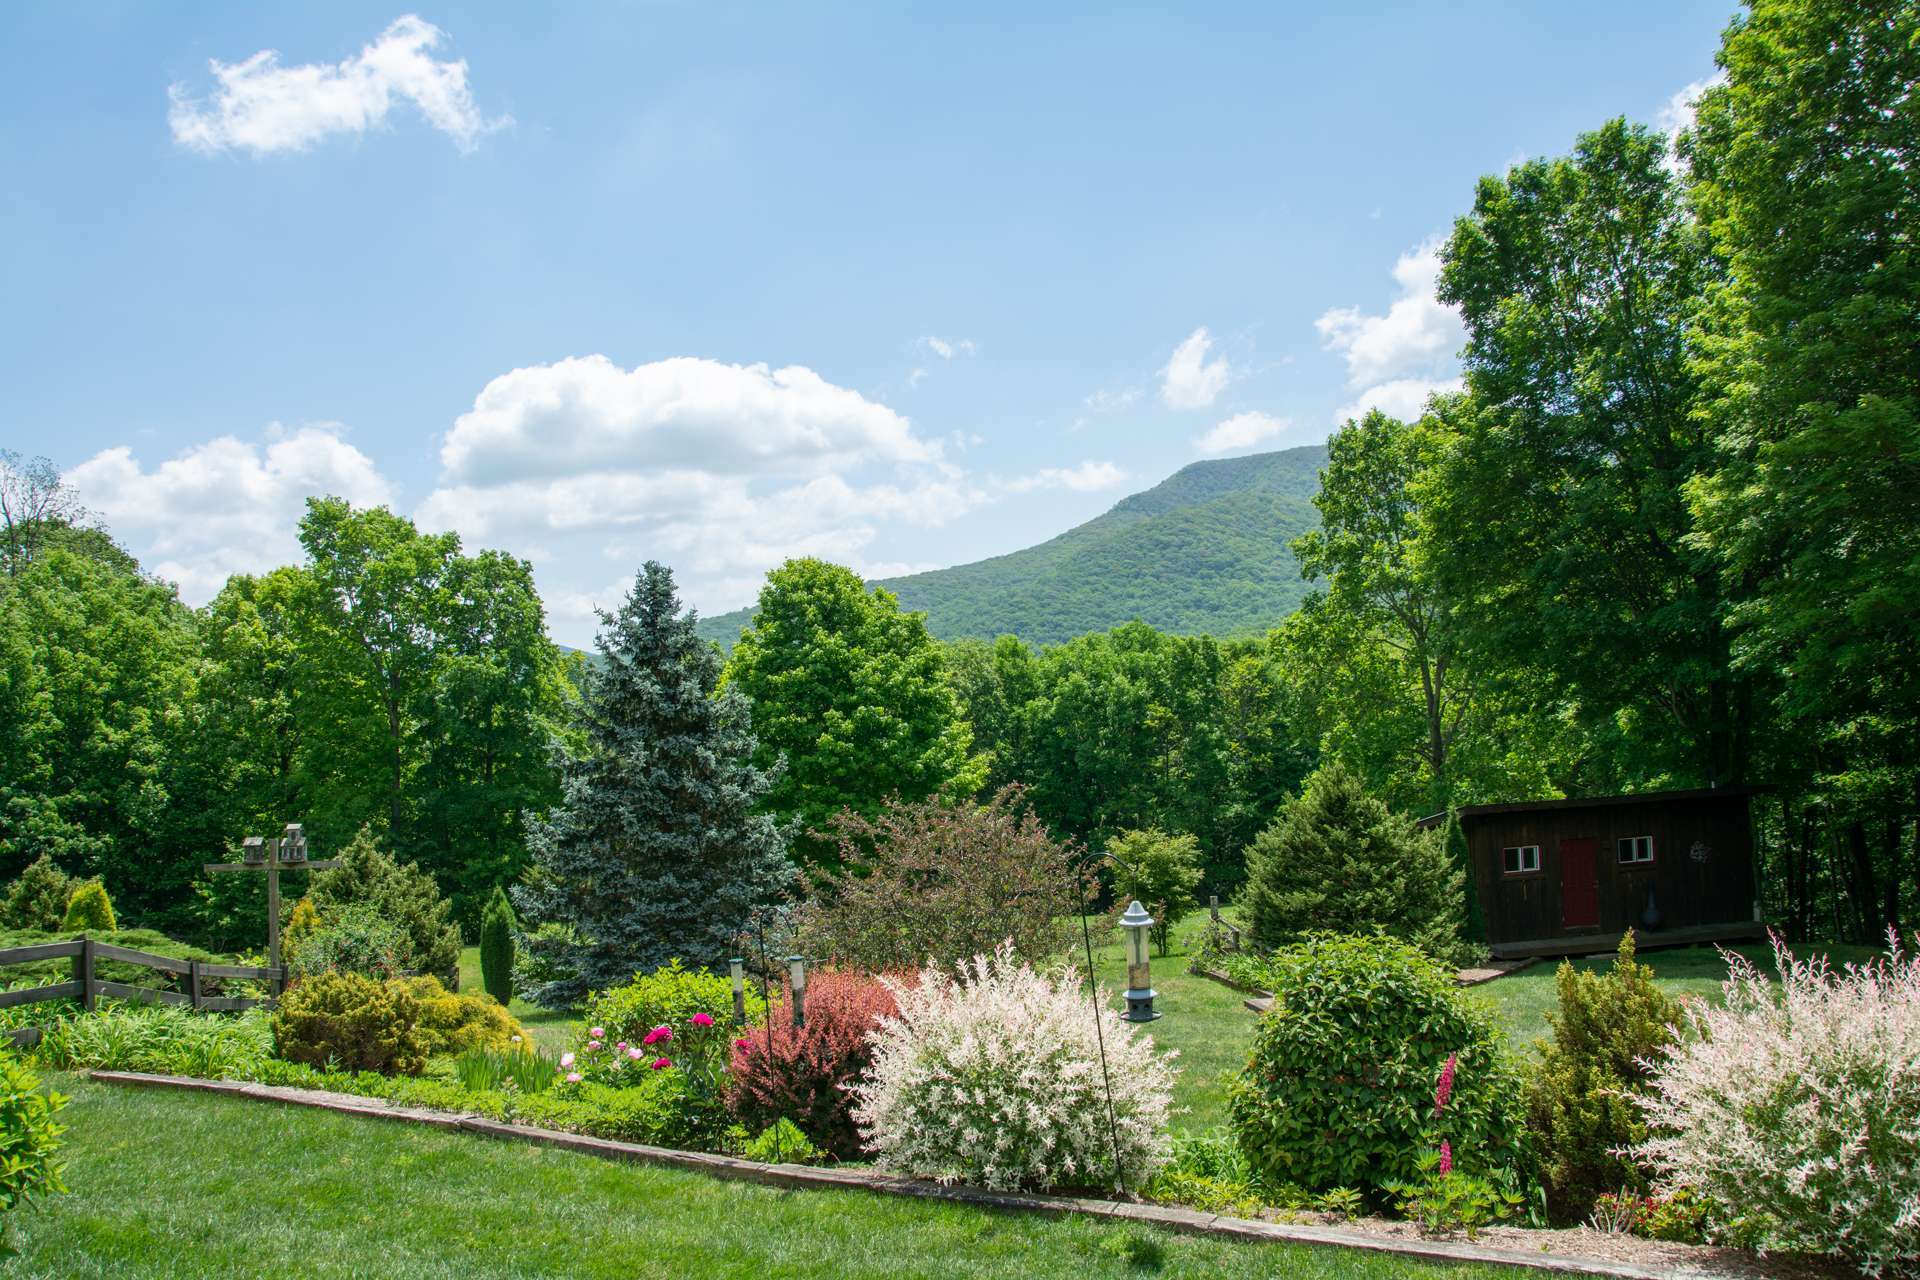 This lovingly landscaped 8+ acre estate offers a relaxed and peaceful life style oriented toward gracious mountain living.